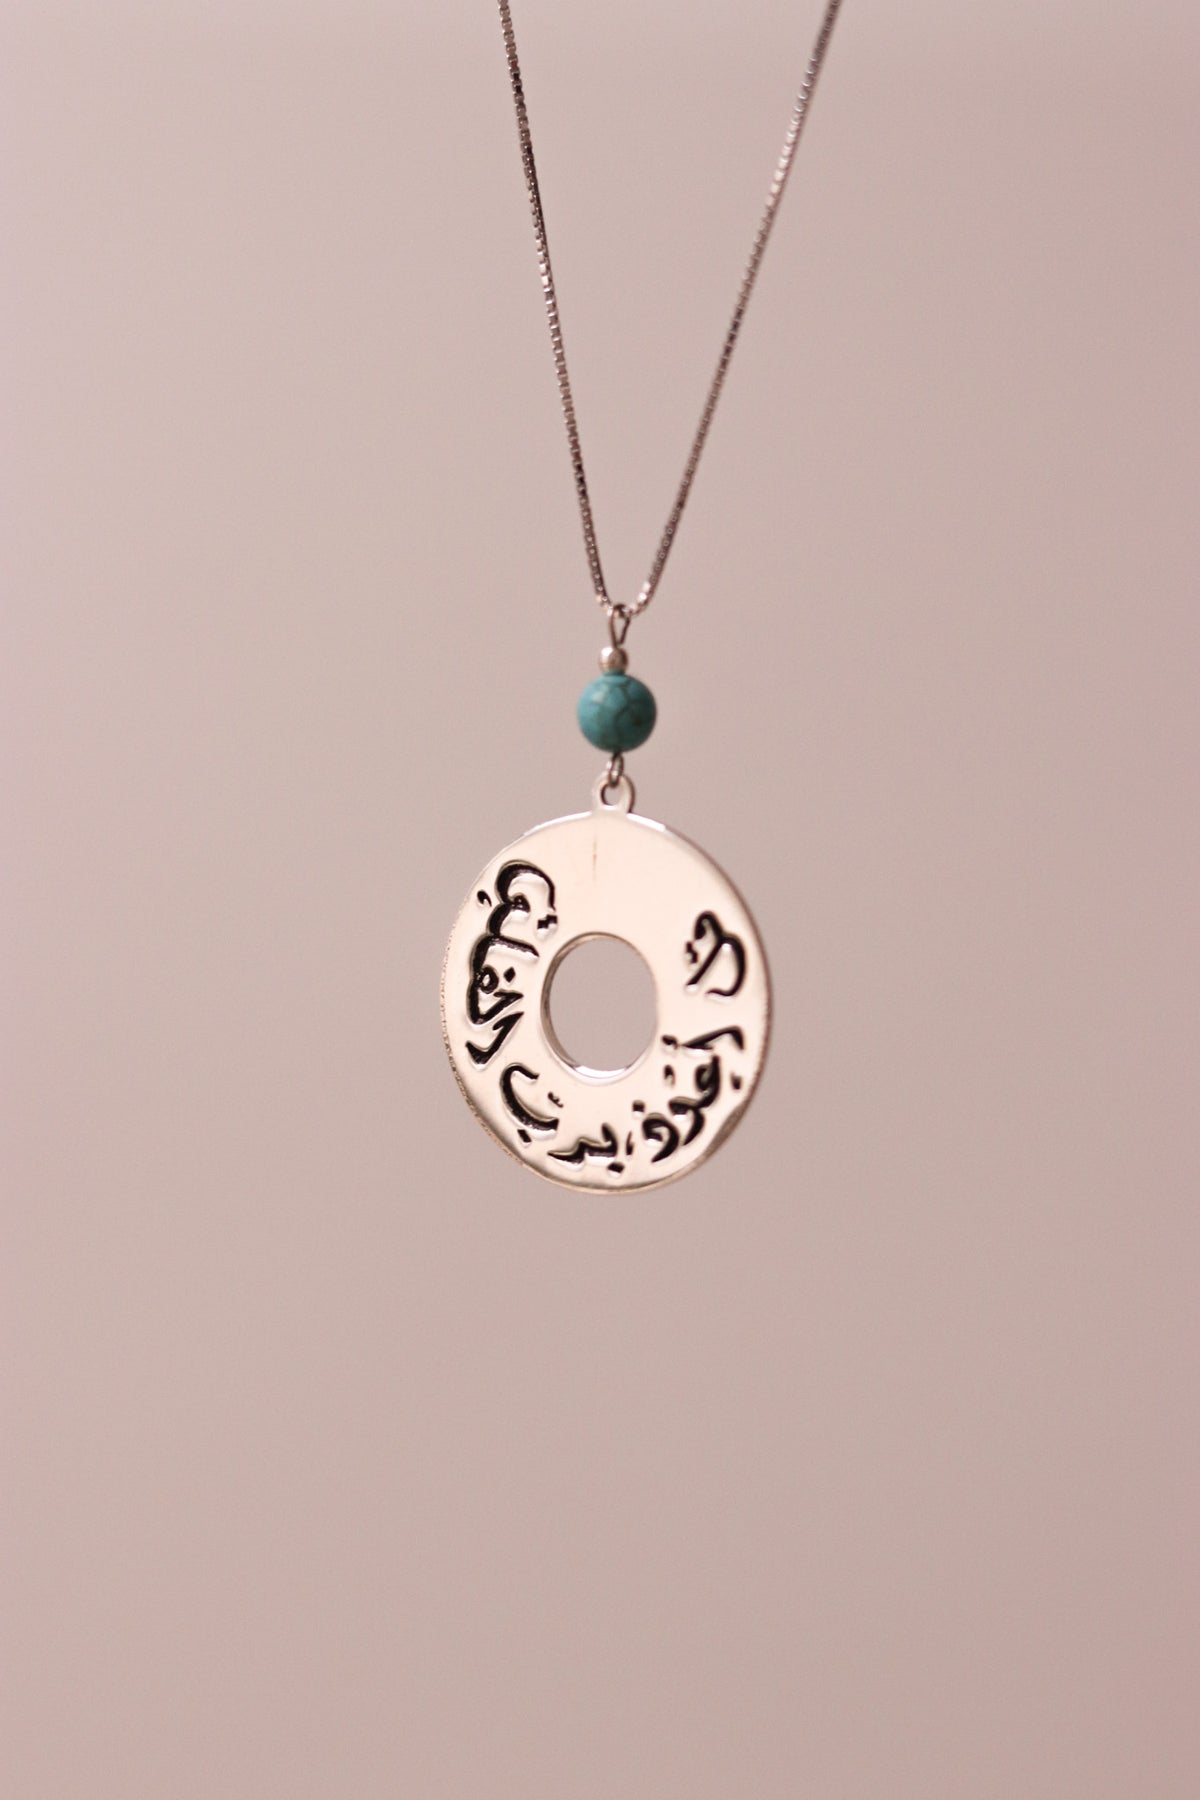 Car mirror chain with "قل اعوذ برب الفلق" engraved on a plate with turquoise stone